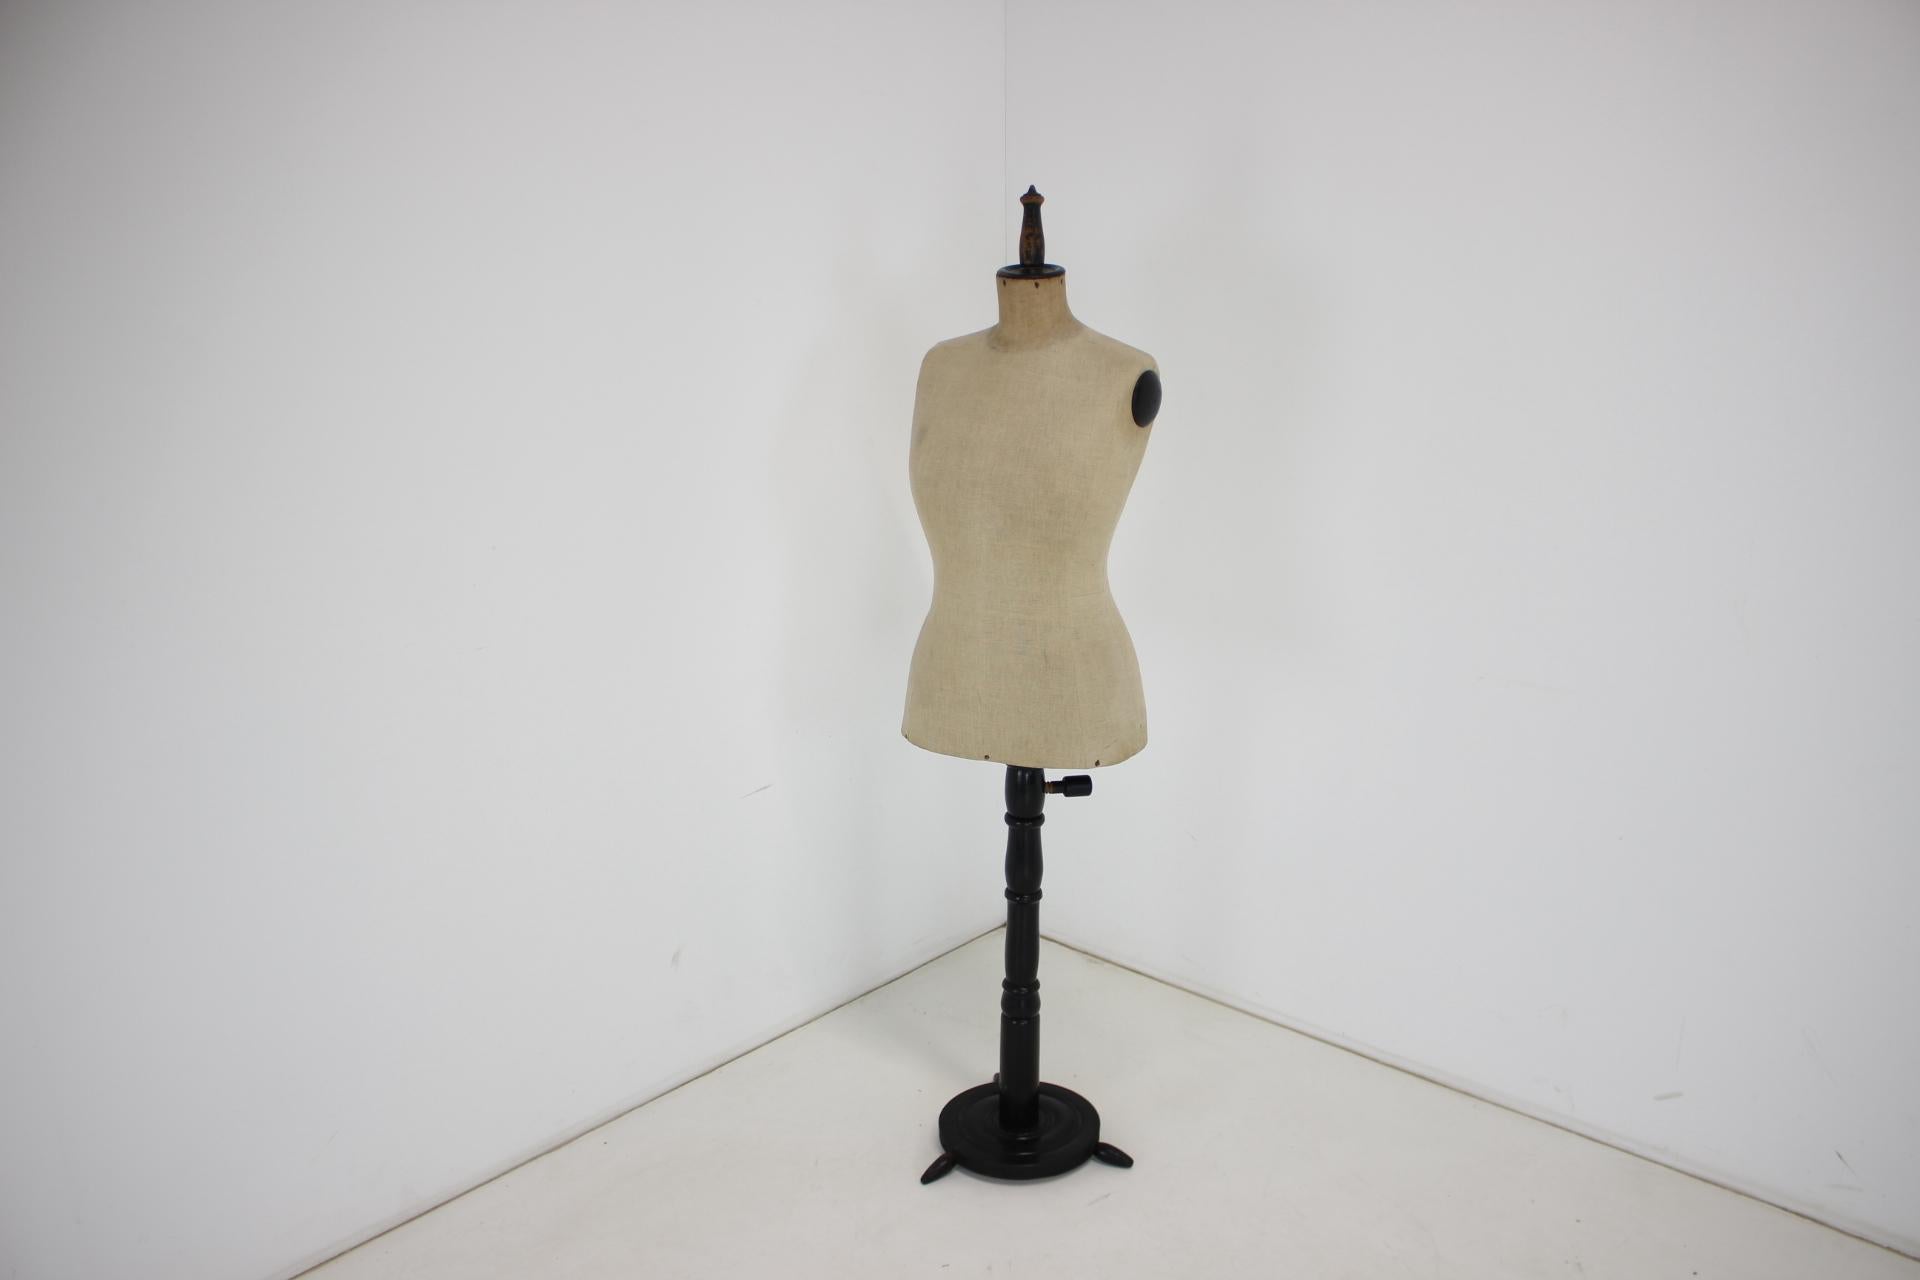 -Height adjustable tailor's maiden, 1920s
- Made of wood, fabric and hard paper
-The height of the full extension is 177cm.